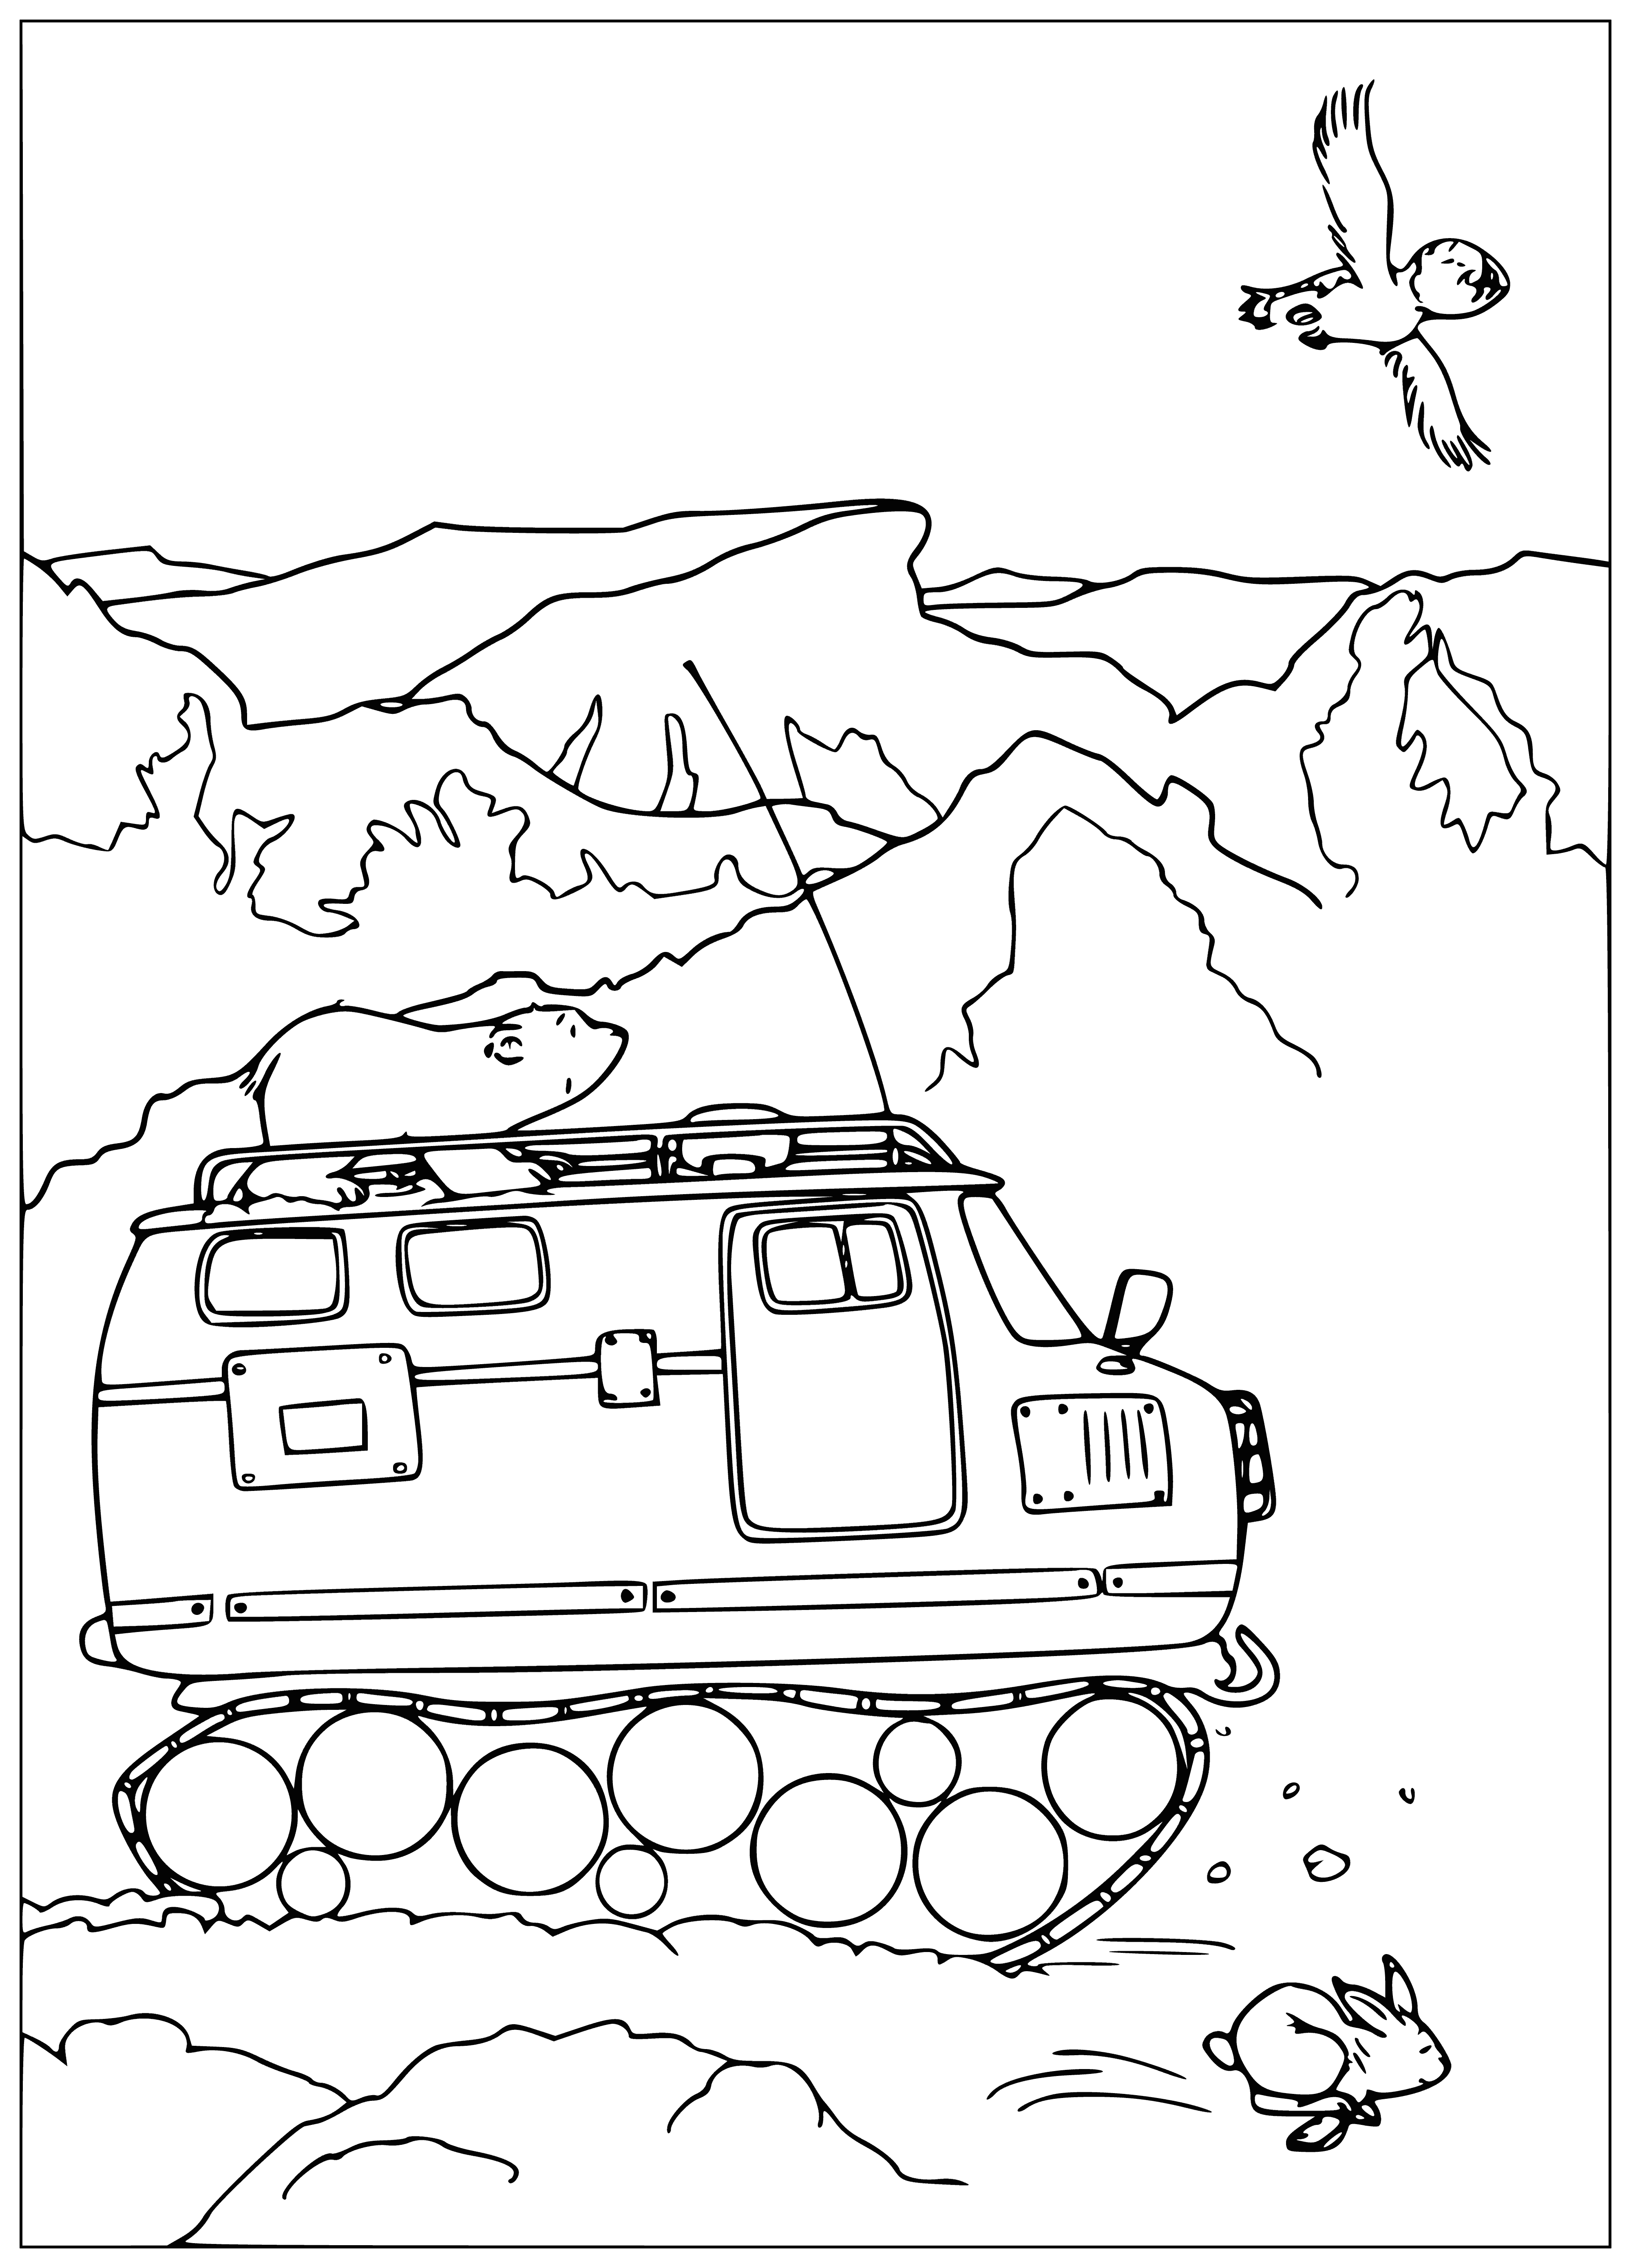 All-terrain vehicle coloring page